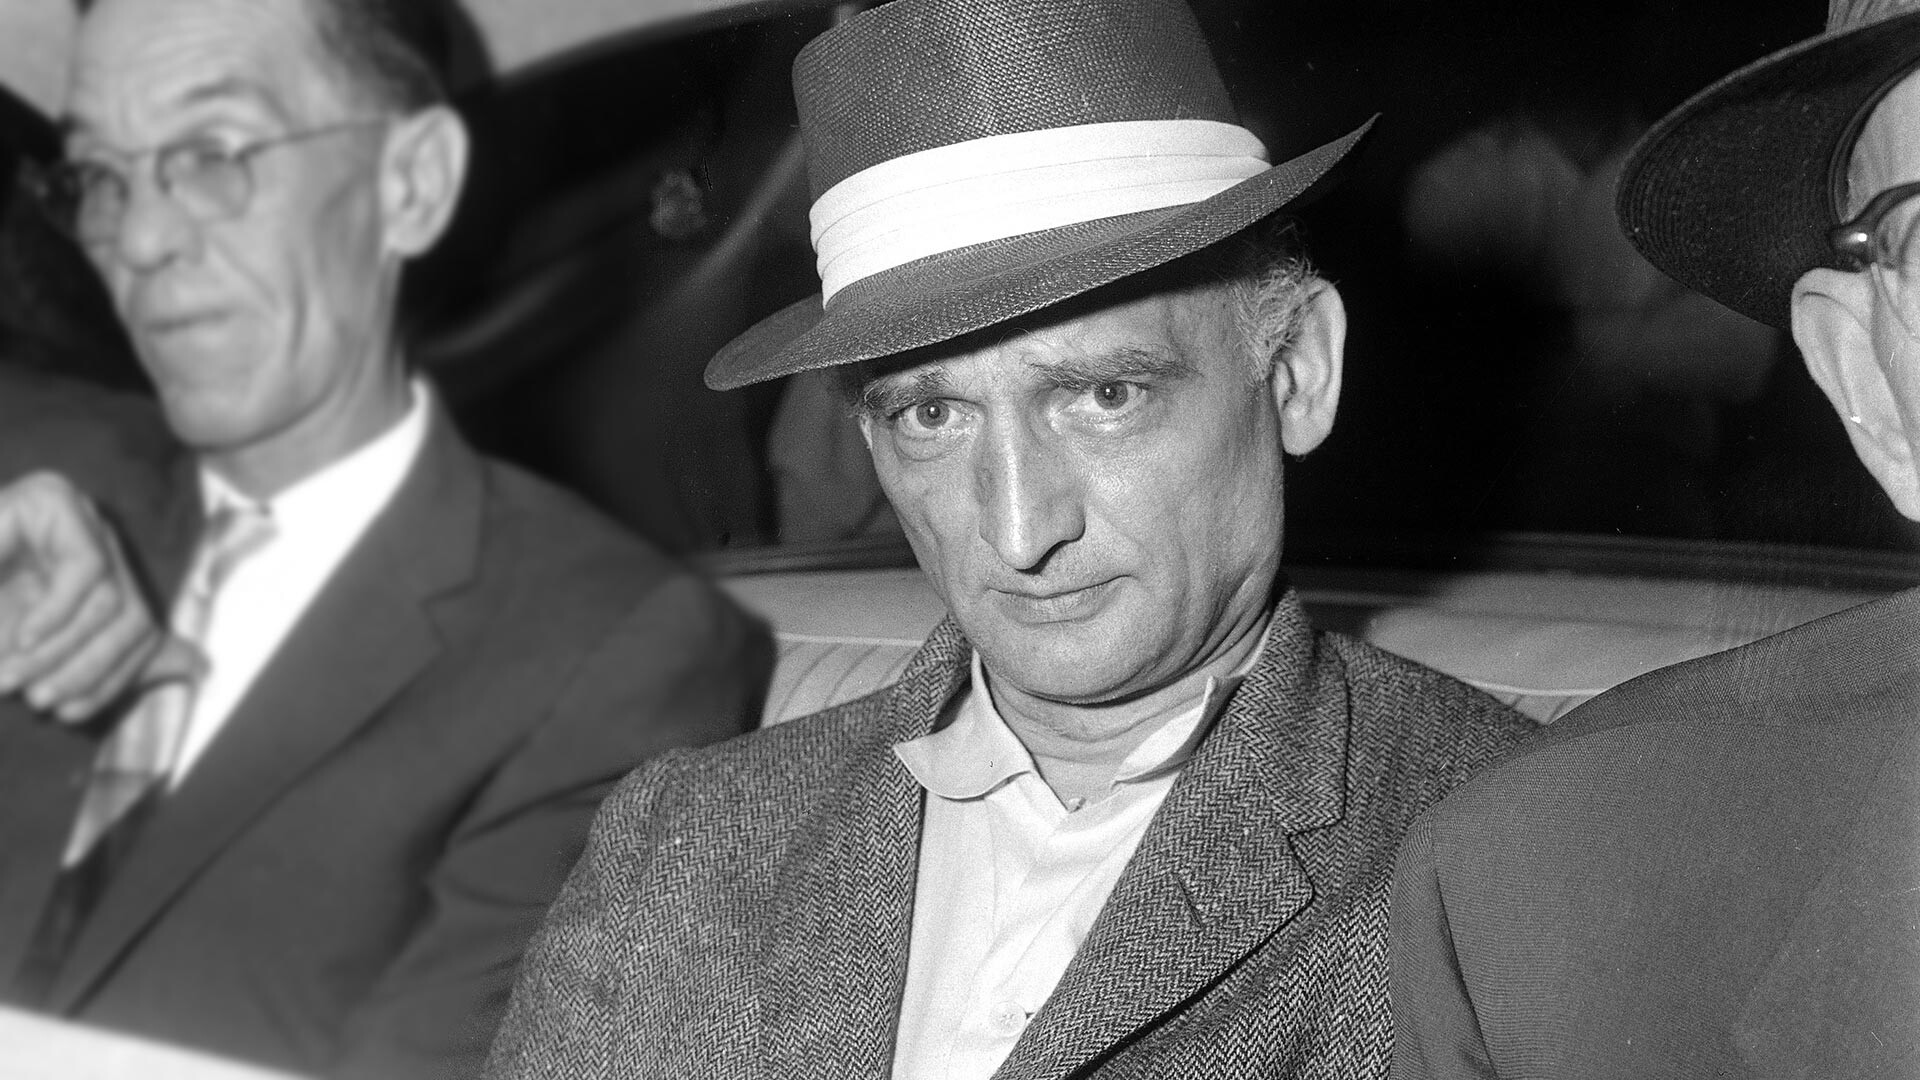 Rudolf Abel, 55, accused Russian master spy, is wide-eyed and close-mouthed as he arrives in New York City from Texas, Aug. 8, 1957. 